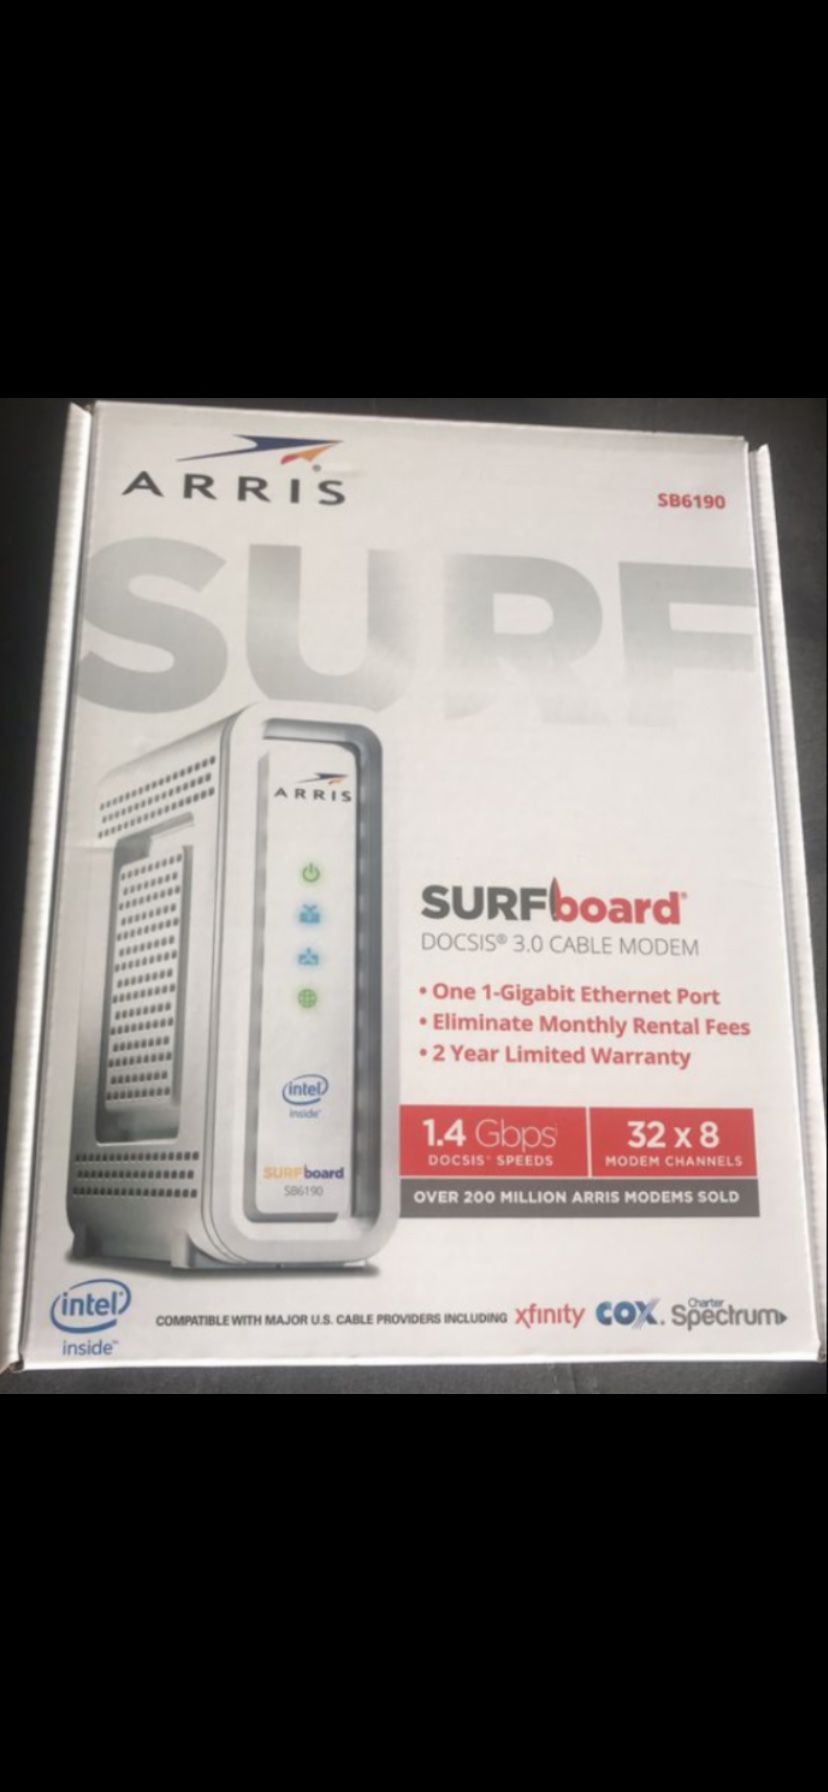 Arric Cable Modem Surfboard Docsis 3.0 brand new